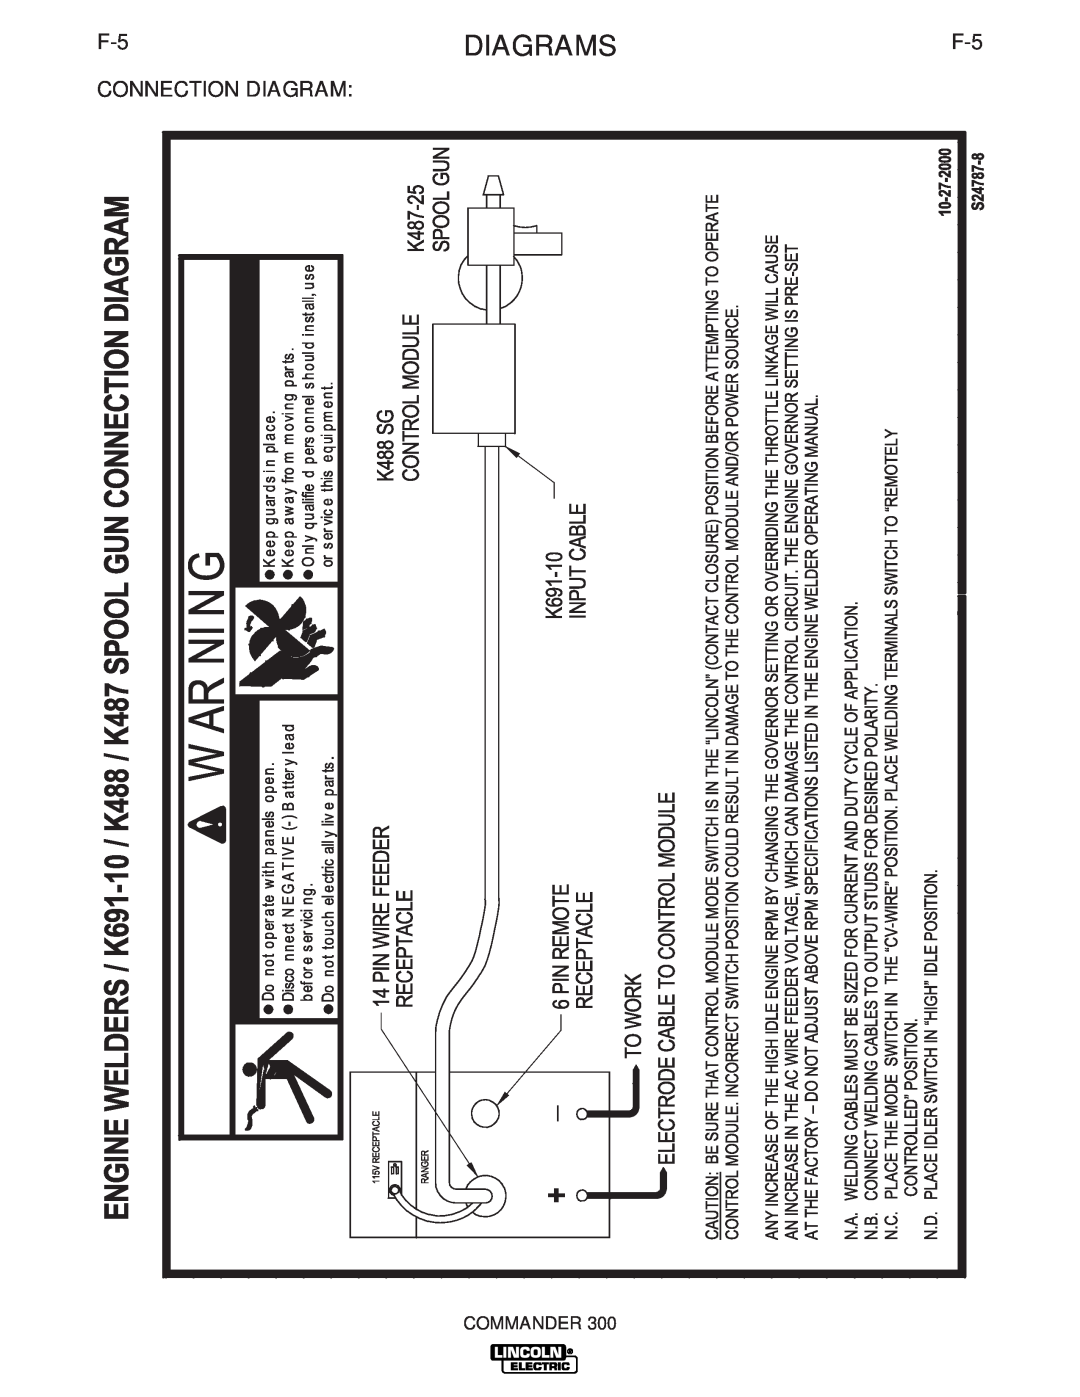 Lincoln Electric IM700-D manual DIAGRAMSF-5, F-5 CONNECTION DIAGRAM, Commander 